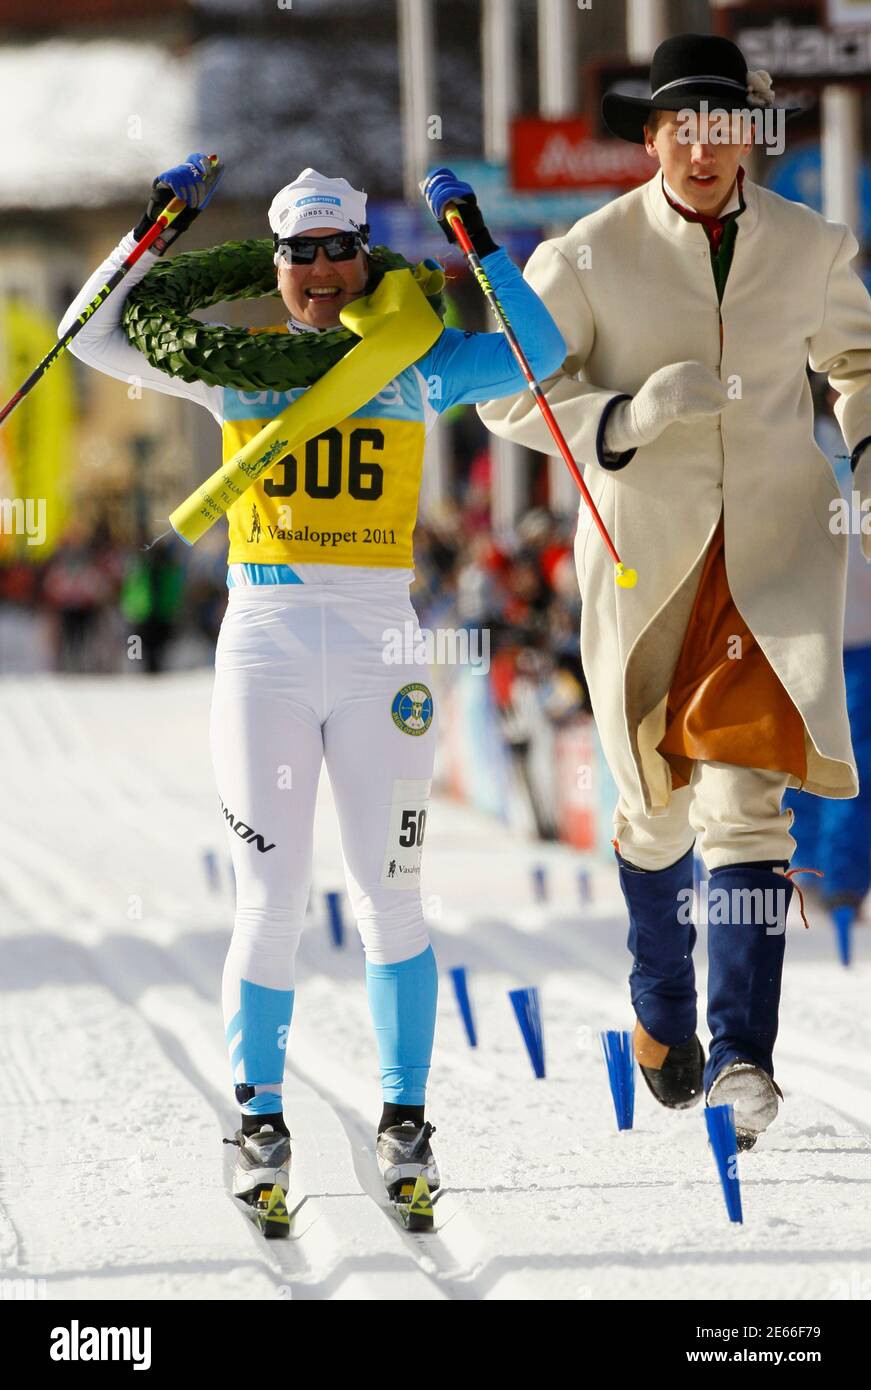 Jenny Hansson of Sweden celebrates winning the women's race of the 87th  Vasaloppet long distance cross country ski race with a crown boy in Mora,  Sweden, March 6, 2011. The traditional 90-km (